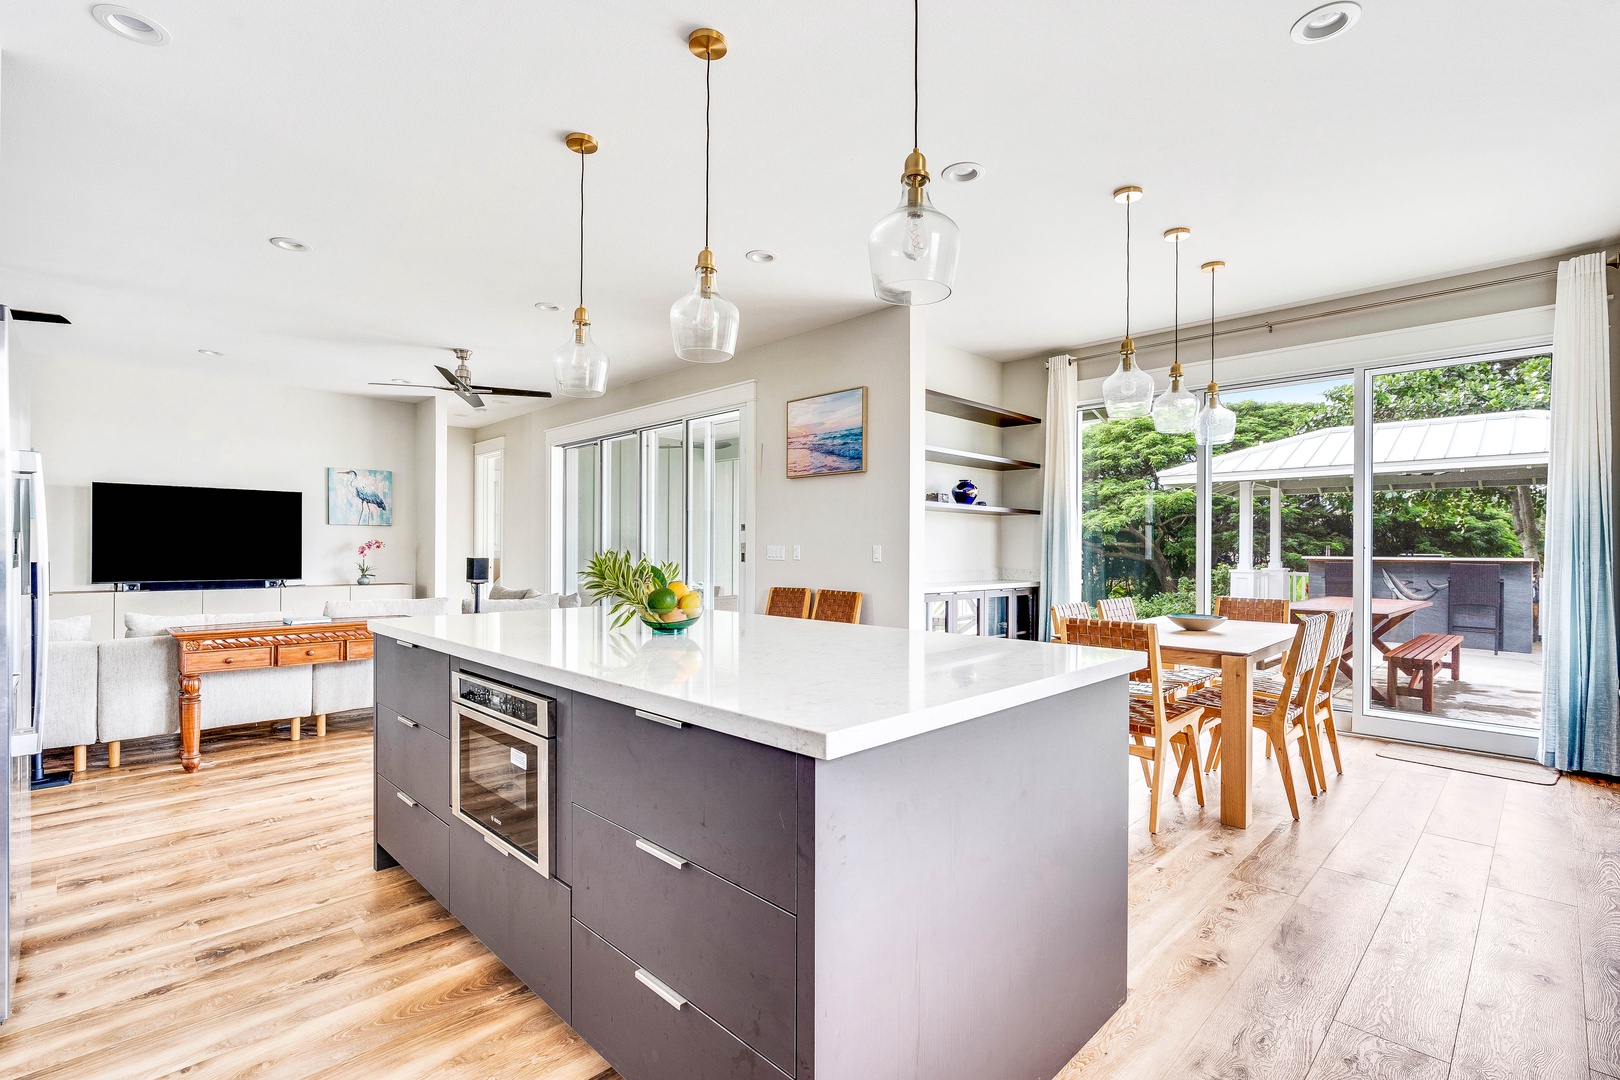 Koloa Vacation Rentals, JC Surf House - Sleek kitchen with island seating flows into the dining area for easy entertaining.